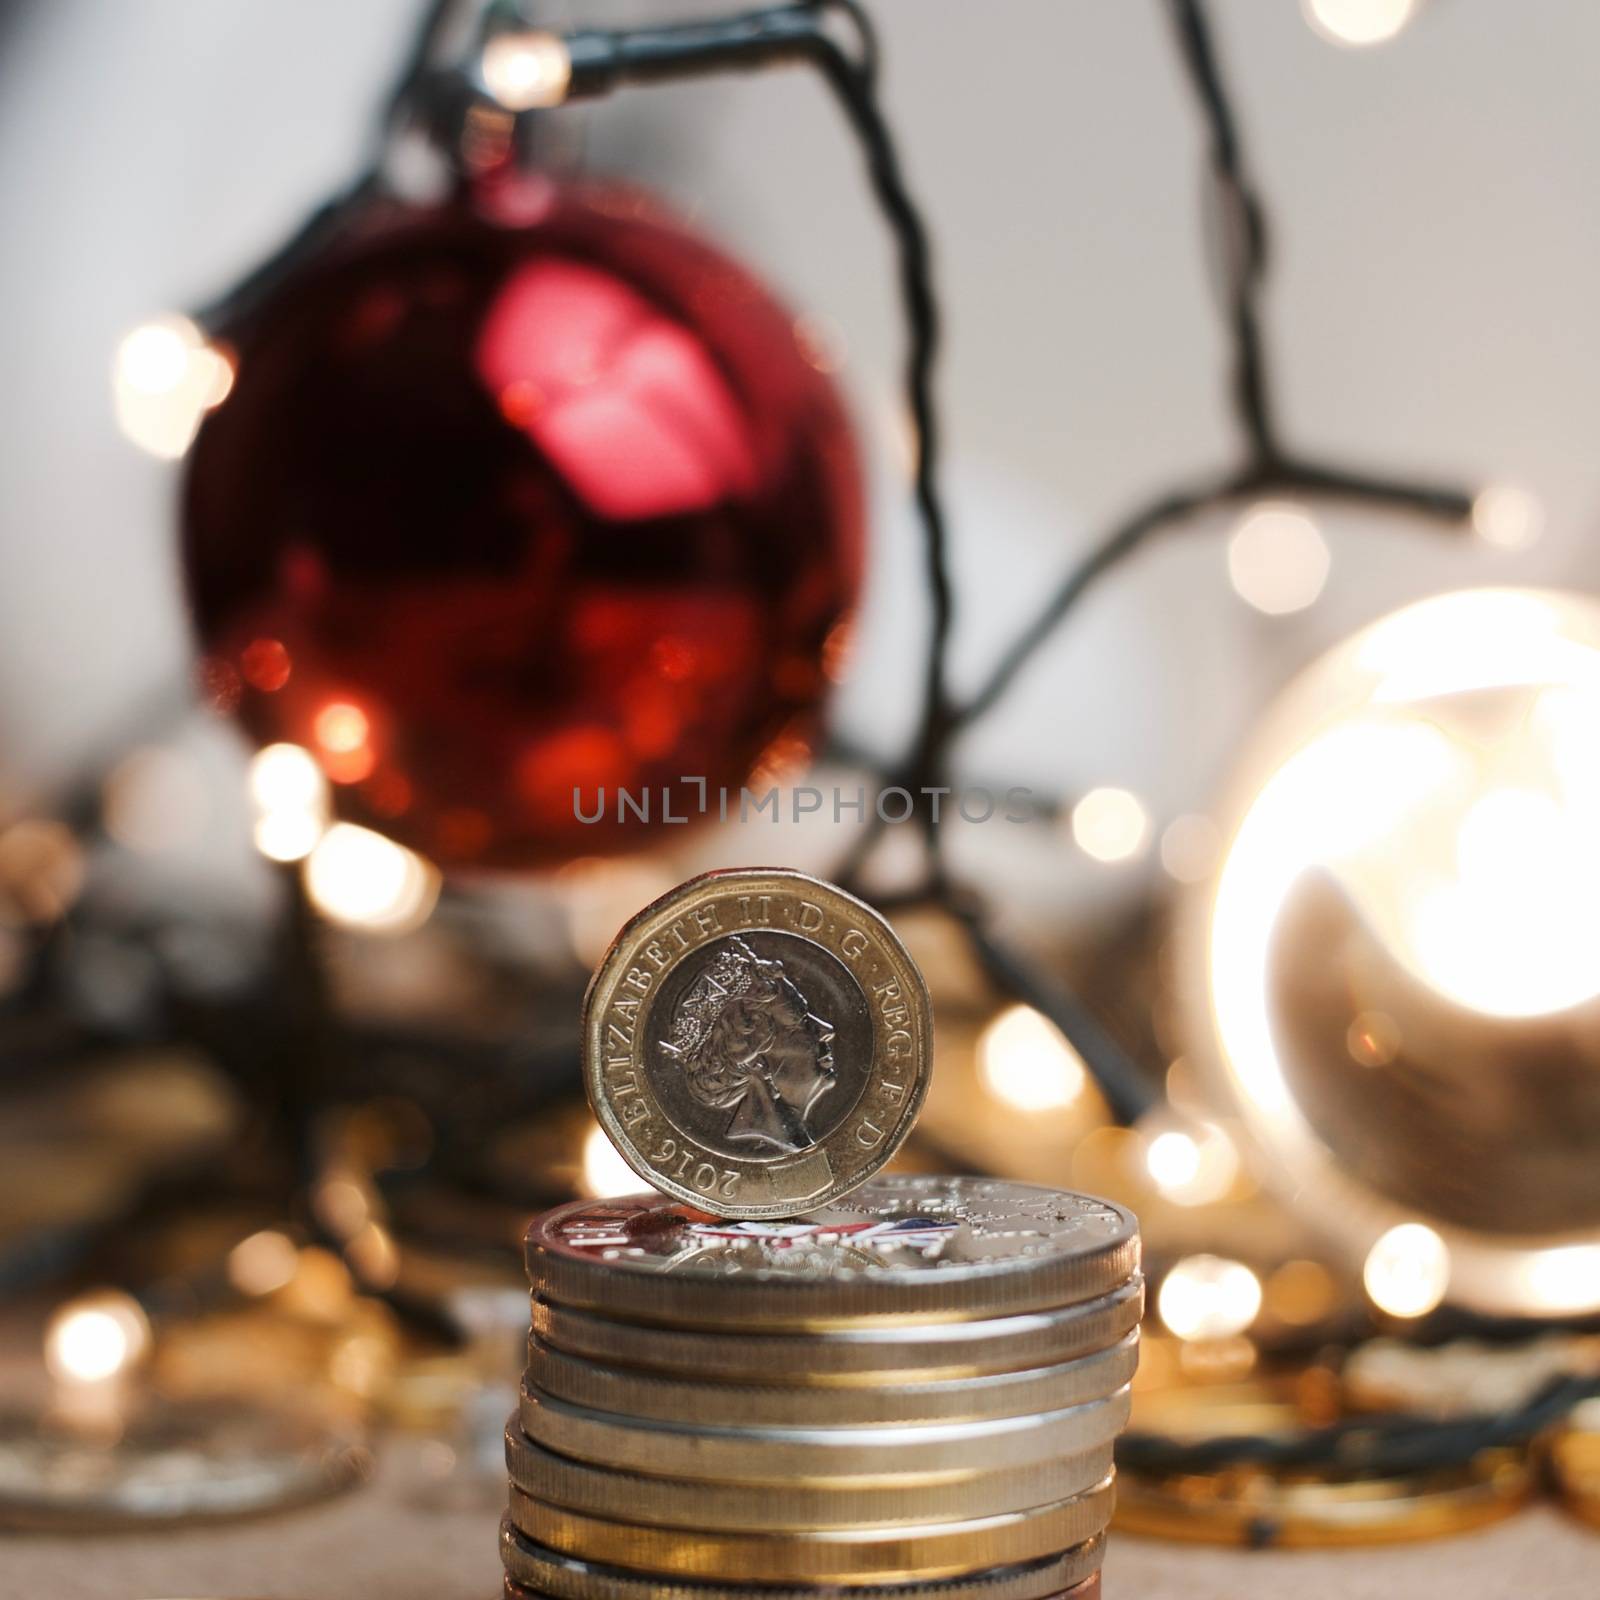 British currency. One pound coin in christmas lights concept.